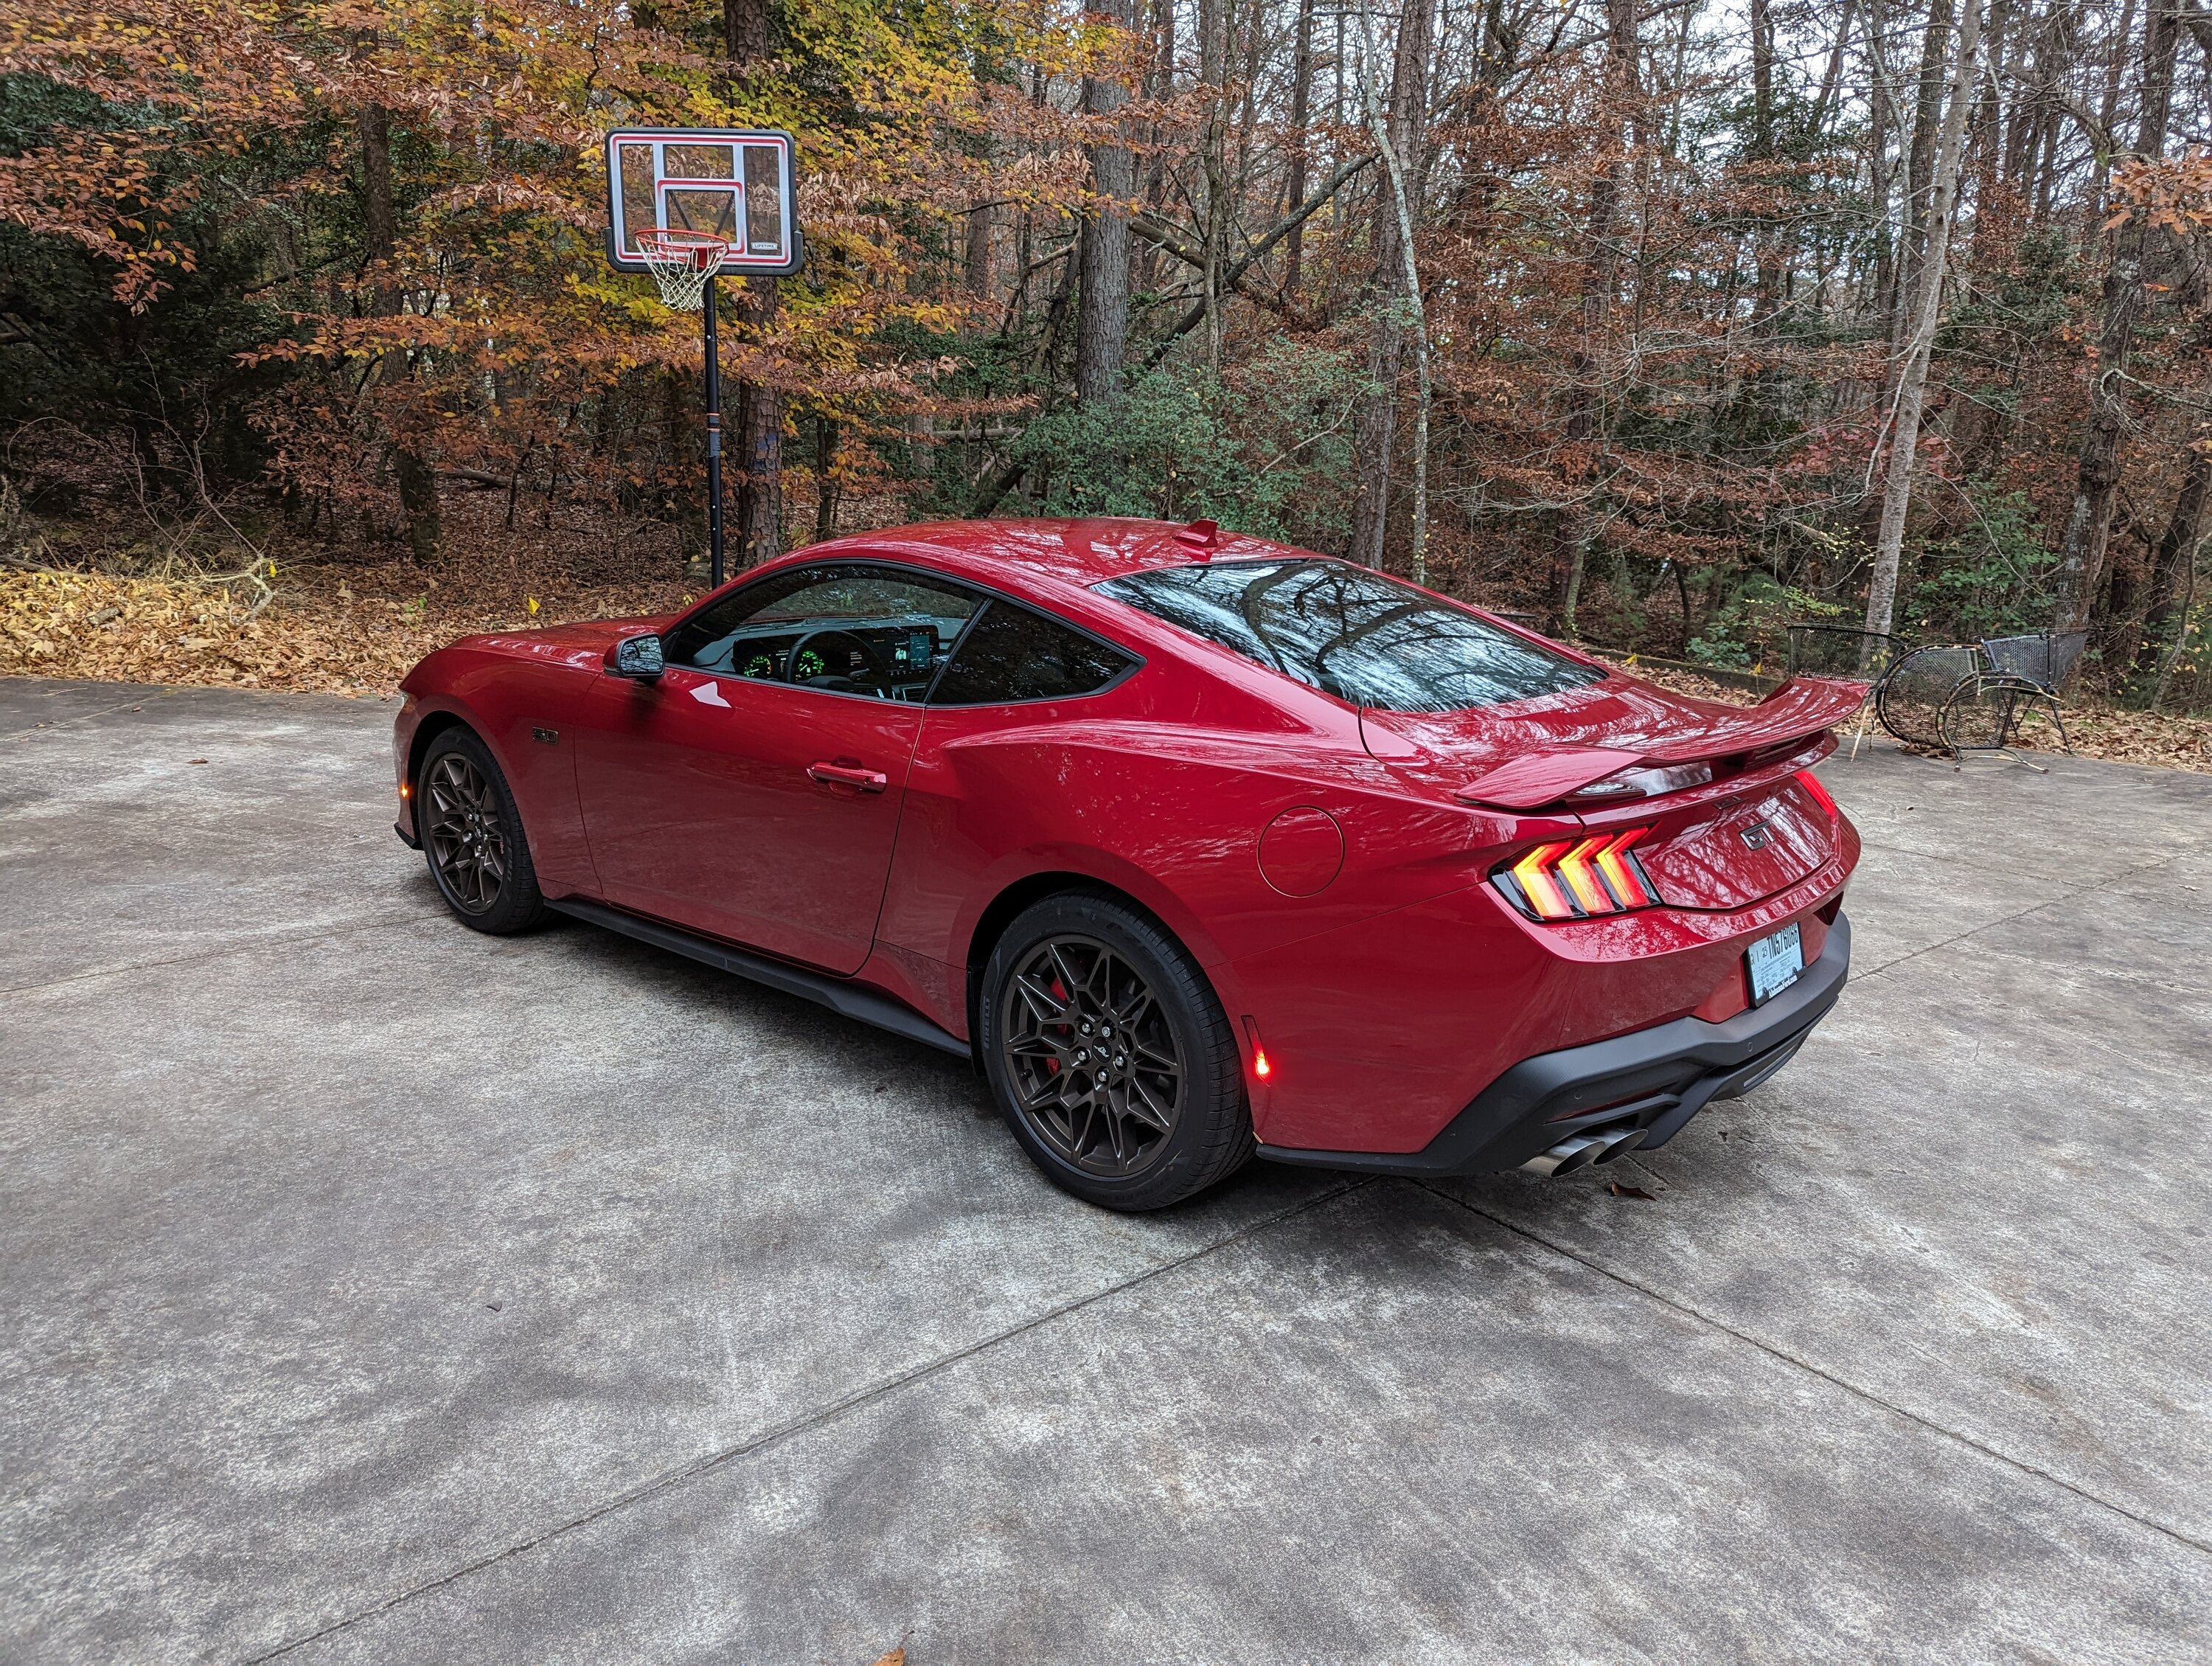 S650 Mustang Official RAPID RED Mustang S650 Thread PXL_20231115_214610809